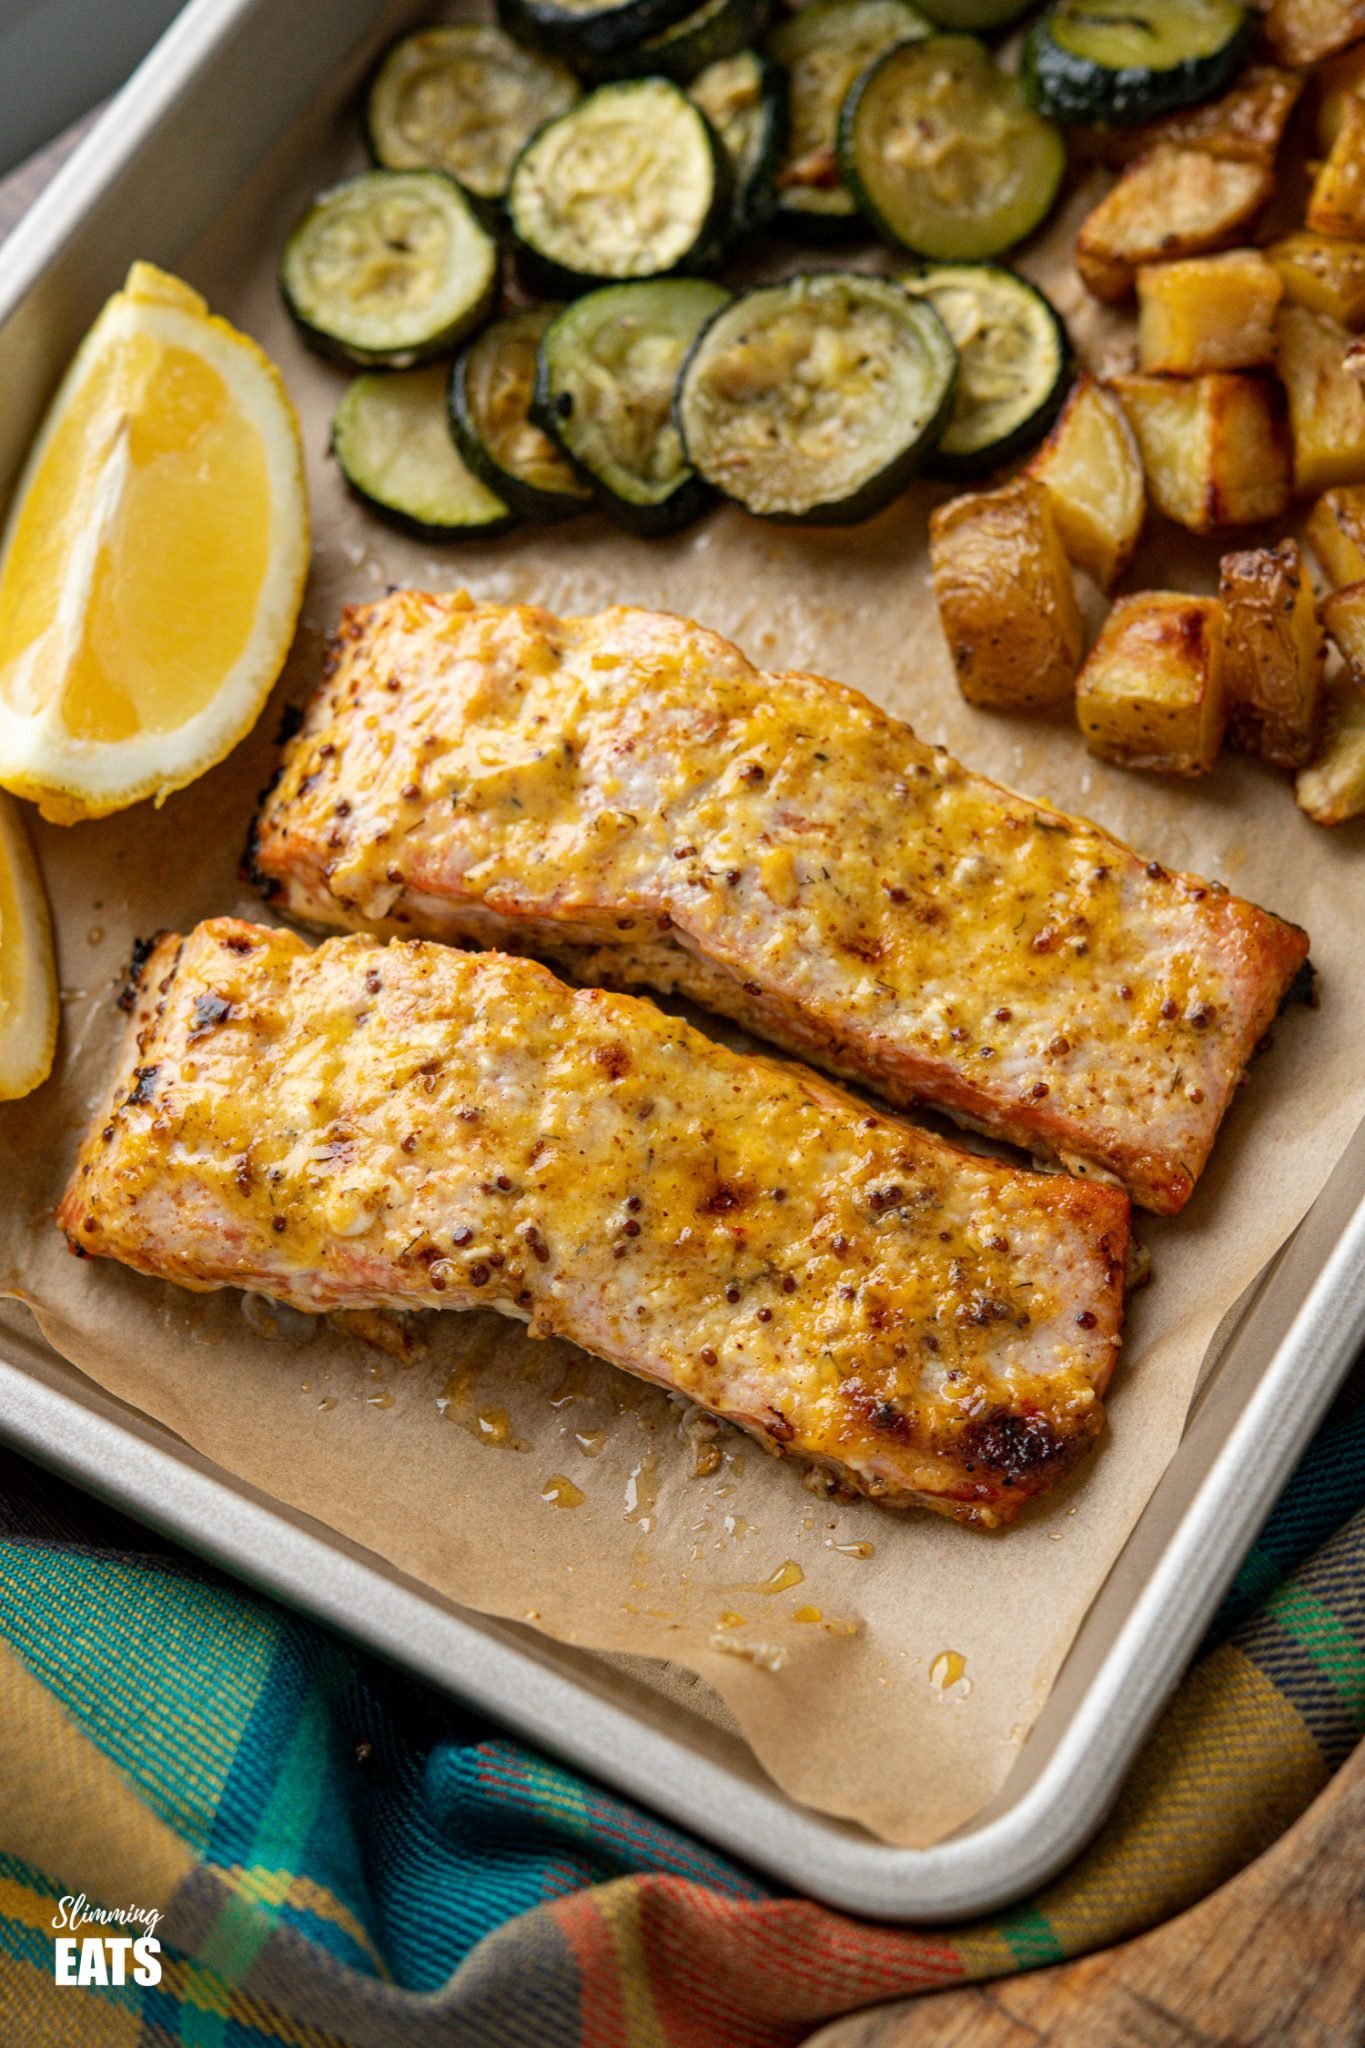 Oven Baked Mustard Salmon Fillets on parchment lined tray with potatoes, zucchini and lemon wedge